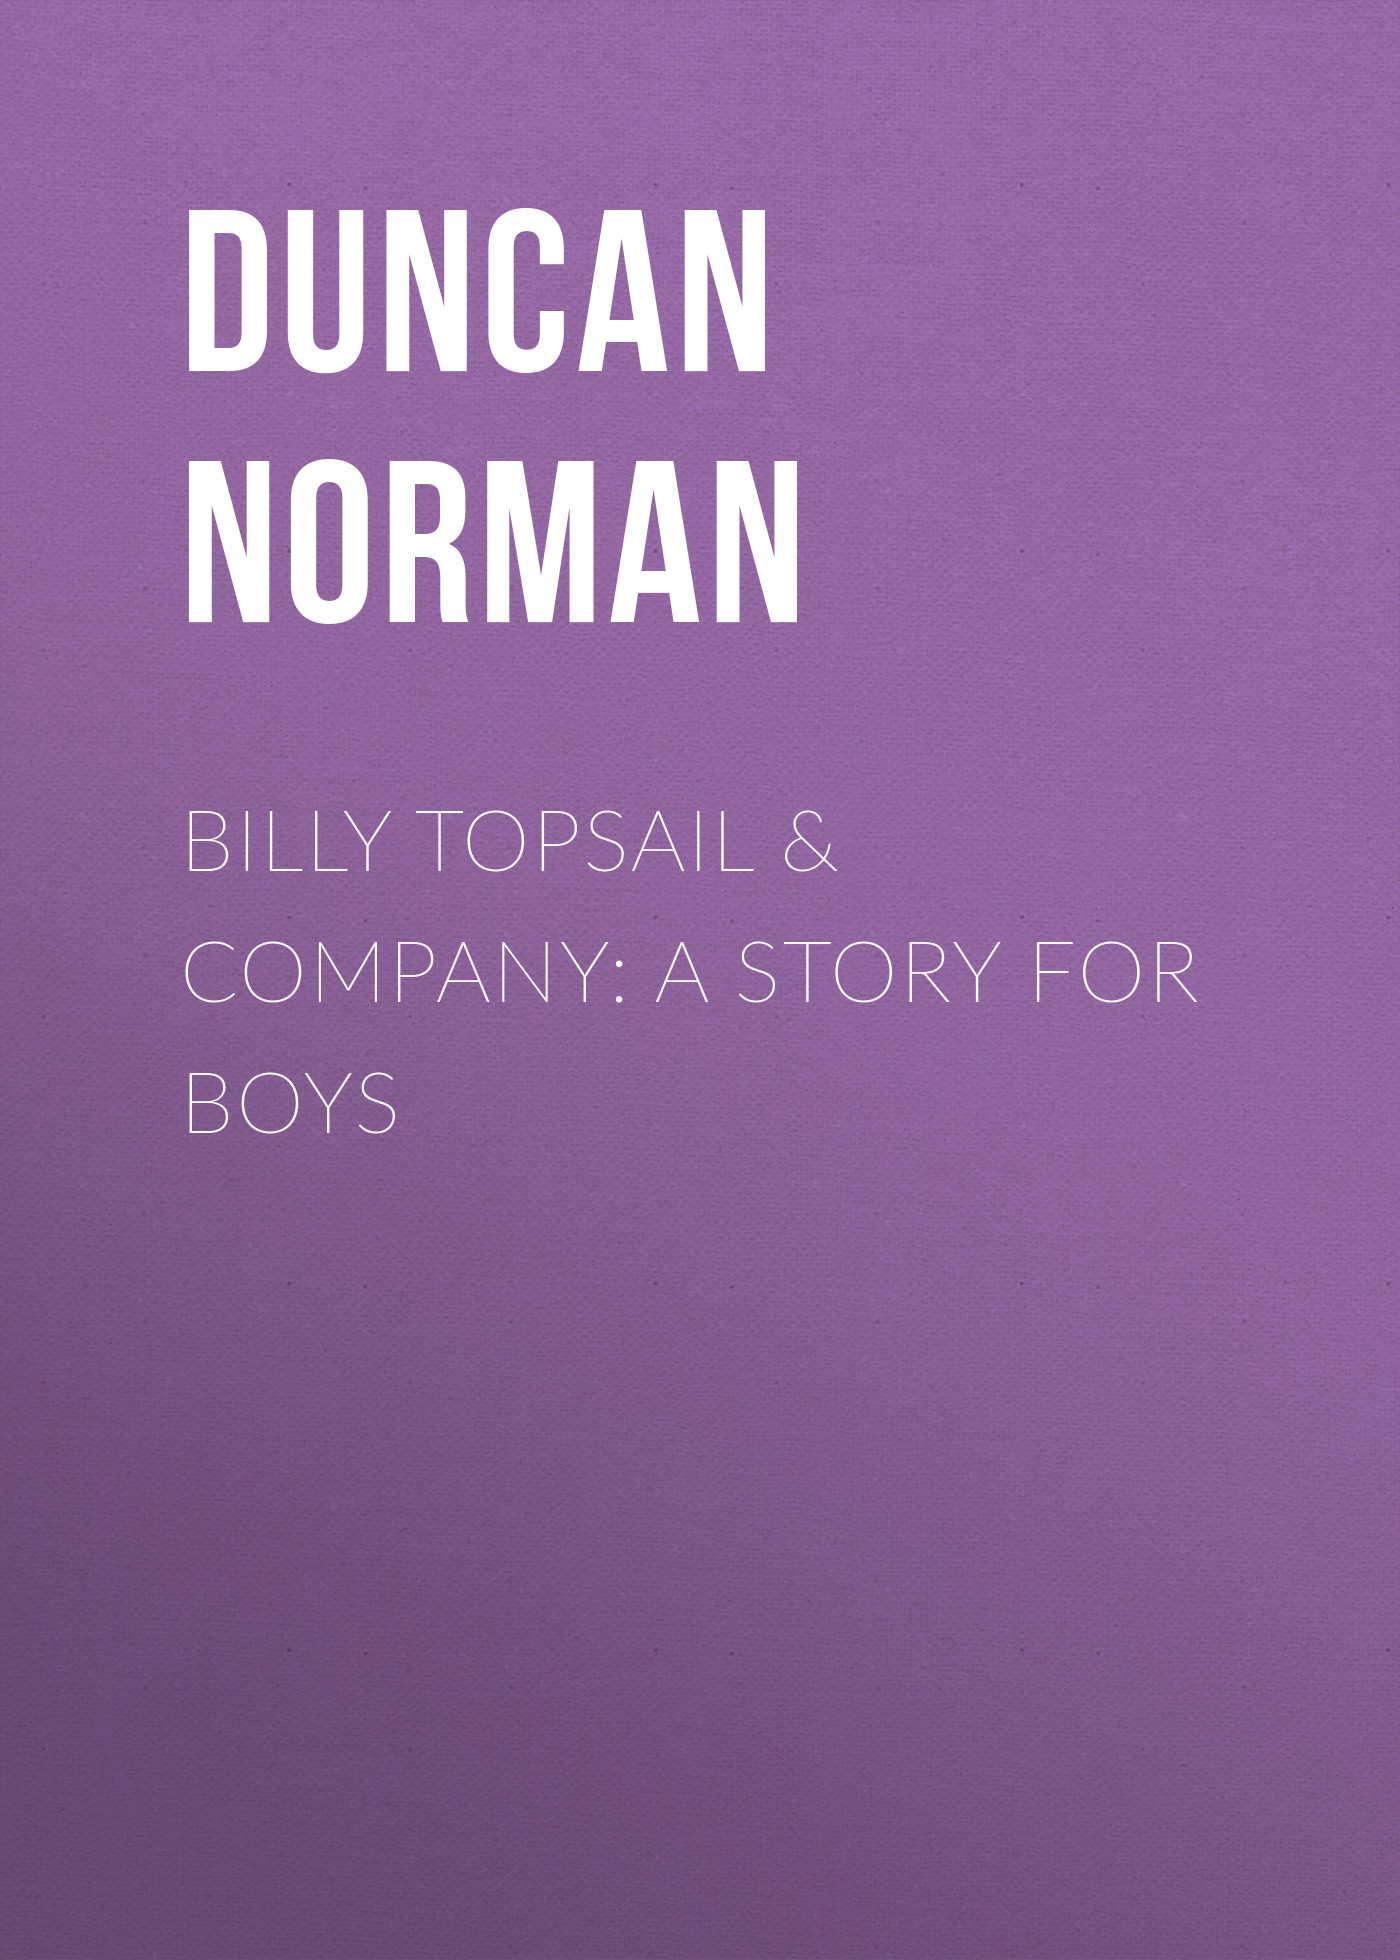 Billy Topsail & Company: A Story for Boys